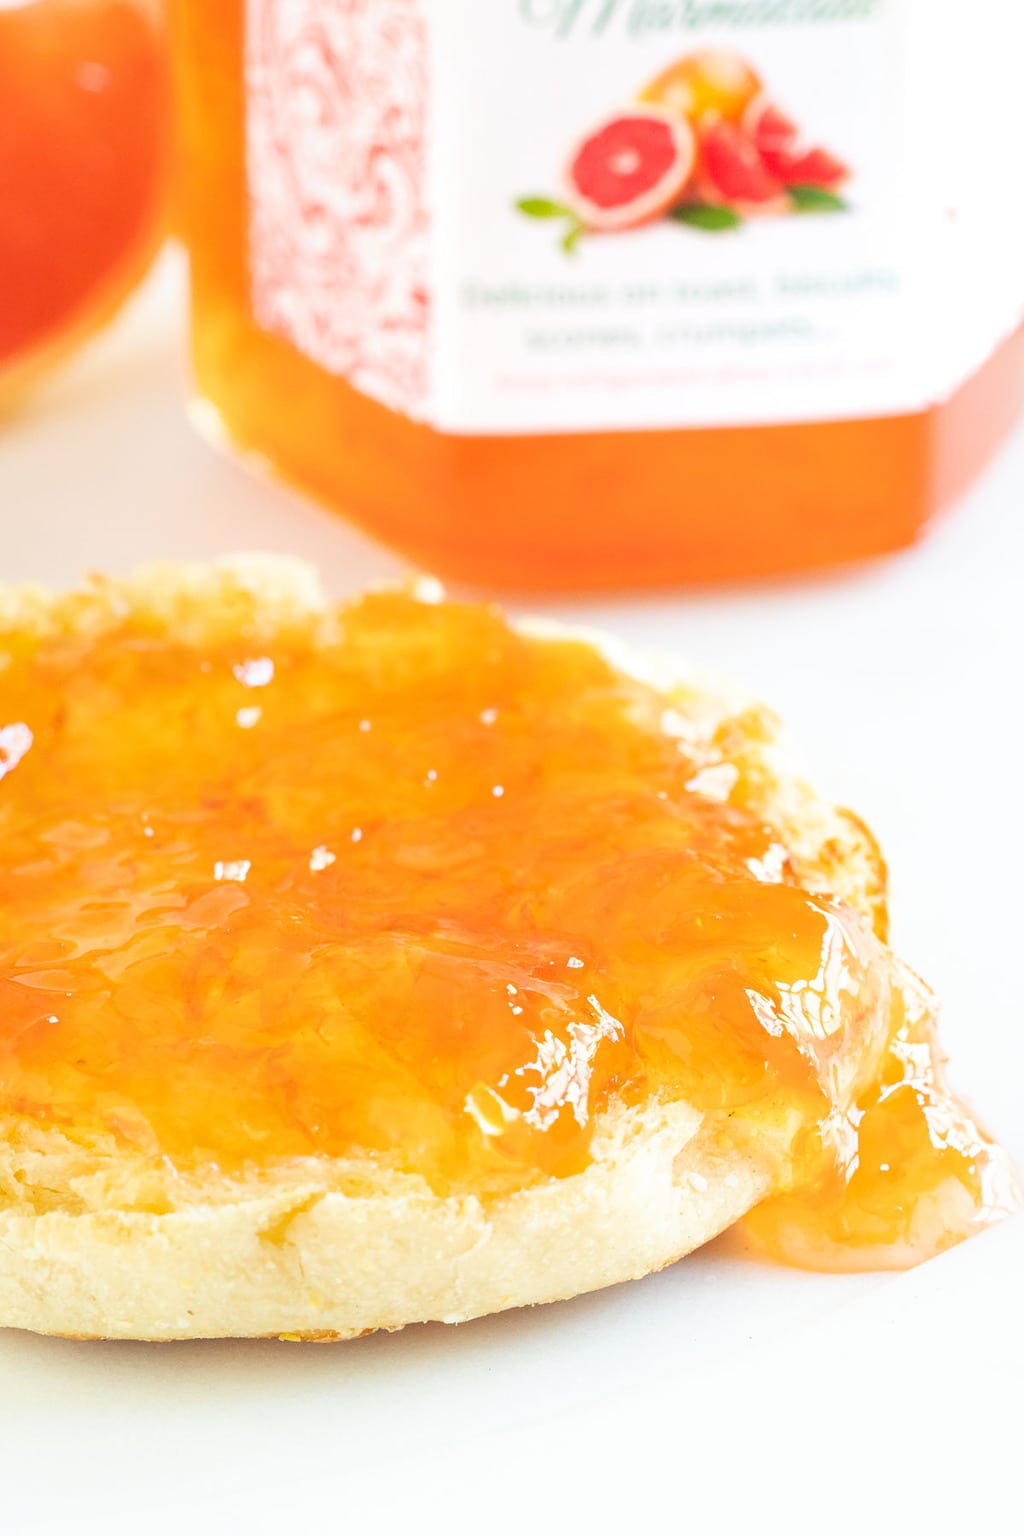 Vertical extreme closeup photo of an English muffin spread with Pink Grapefruit Marmalade and a jar of the marmalade in the background.